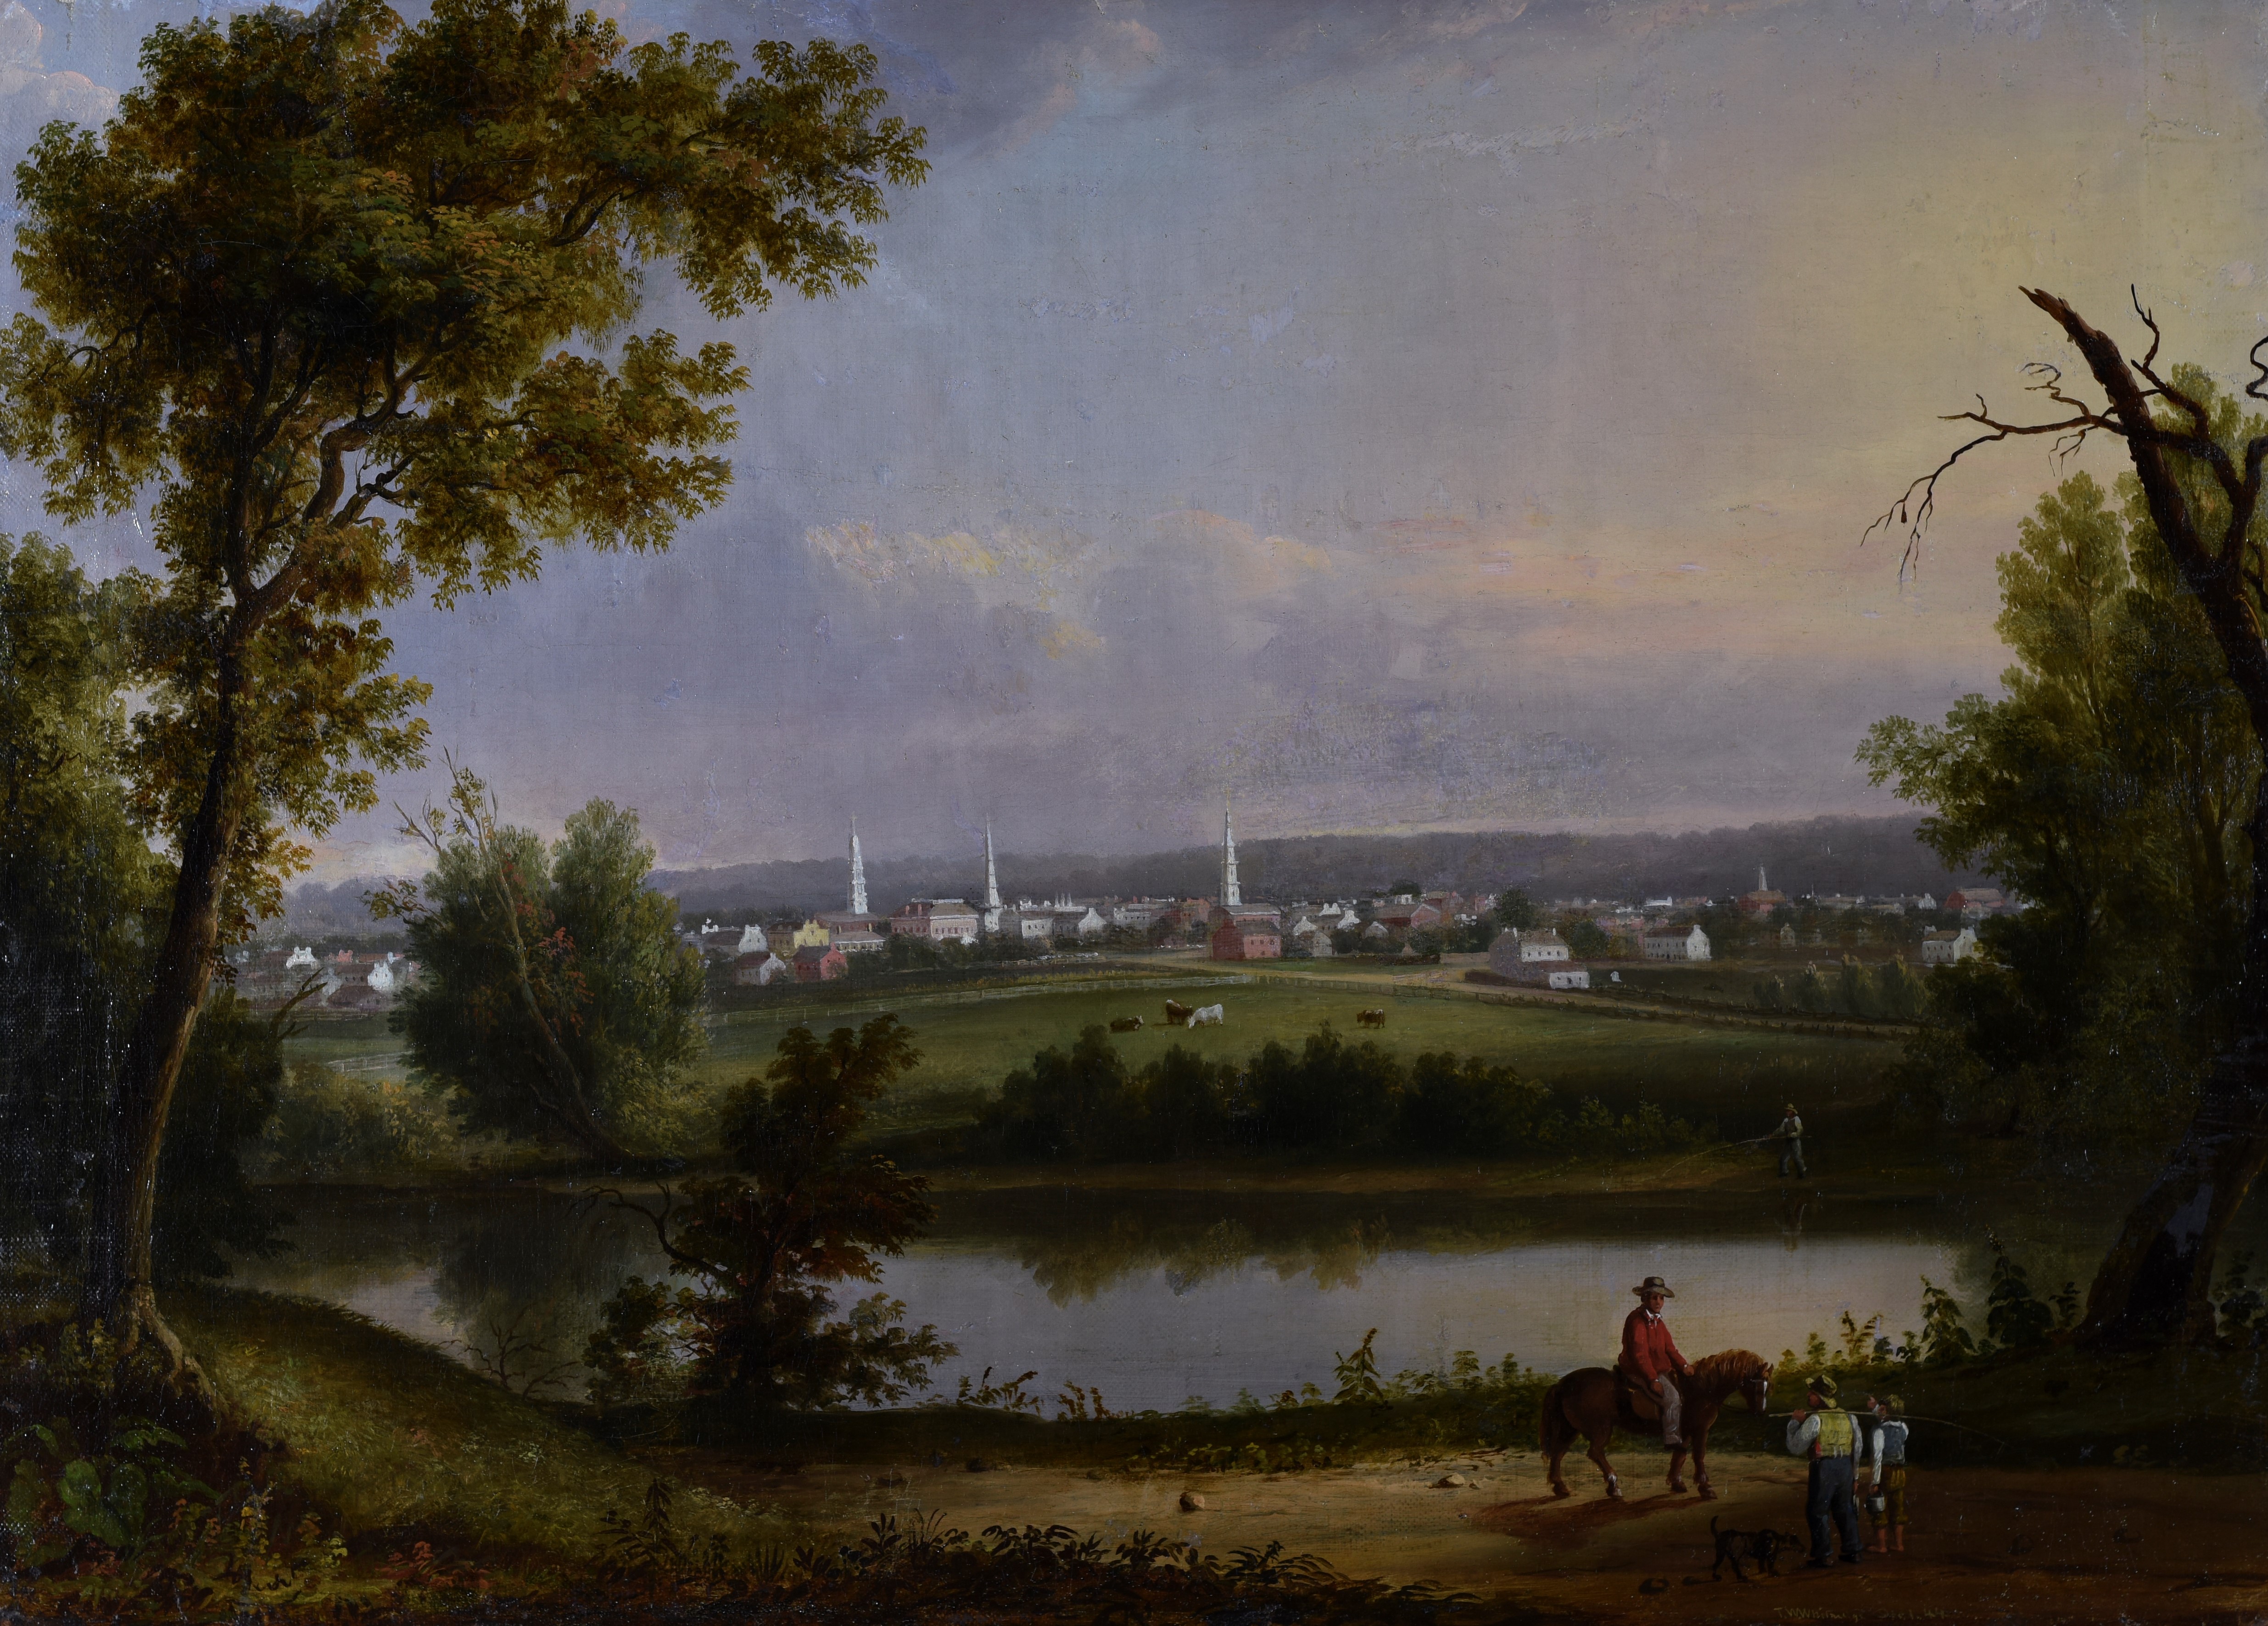 maintenance work "''Dayton from Steele's Hill'' by Thomas Worthington Whittredge involved cleaning the painting, repairing damaged areas and correcting improper previous repairs.  It is part of the exhibition 